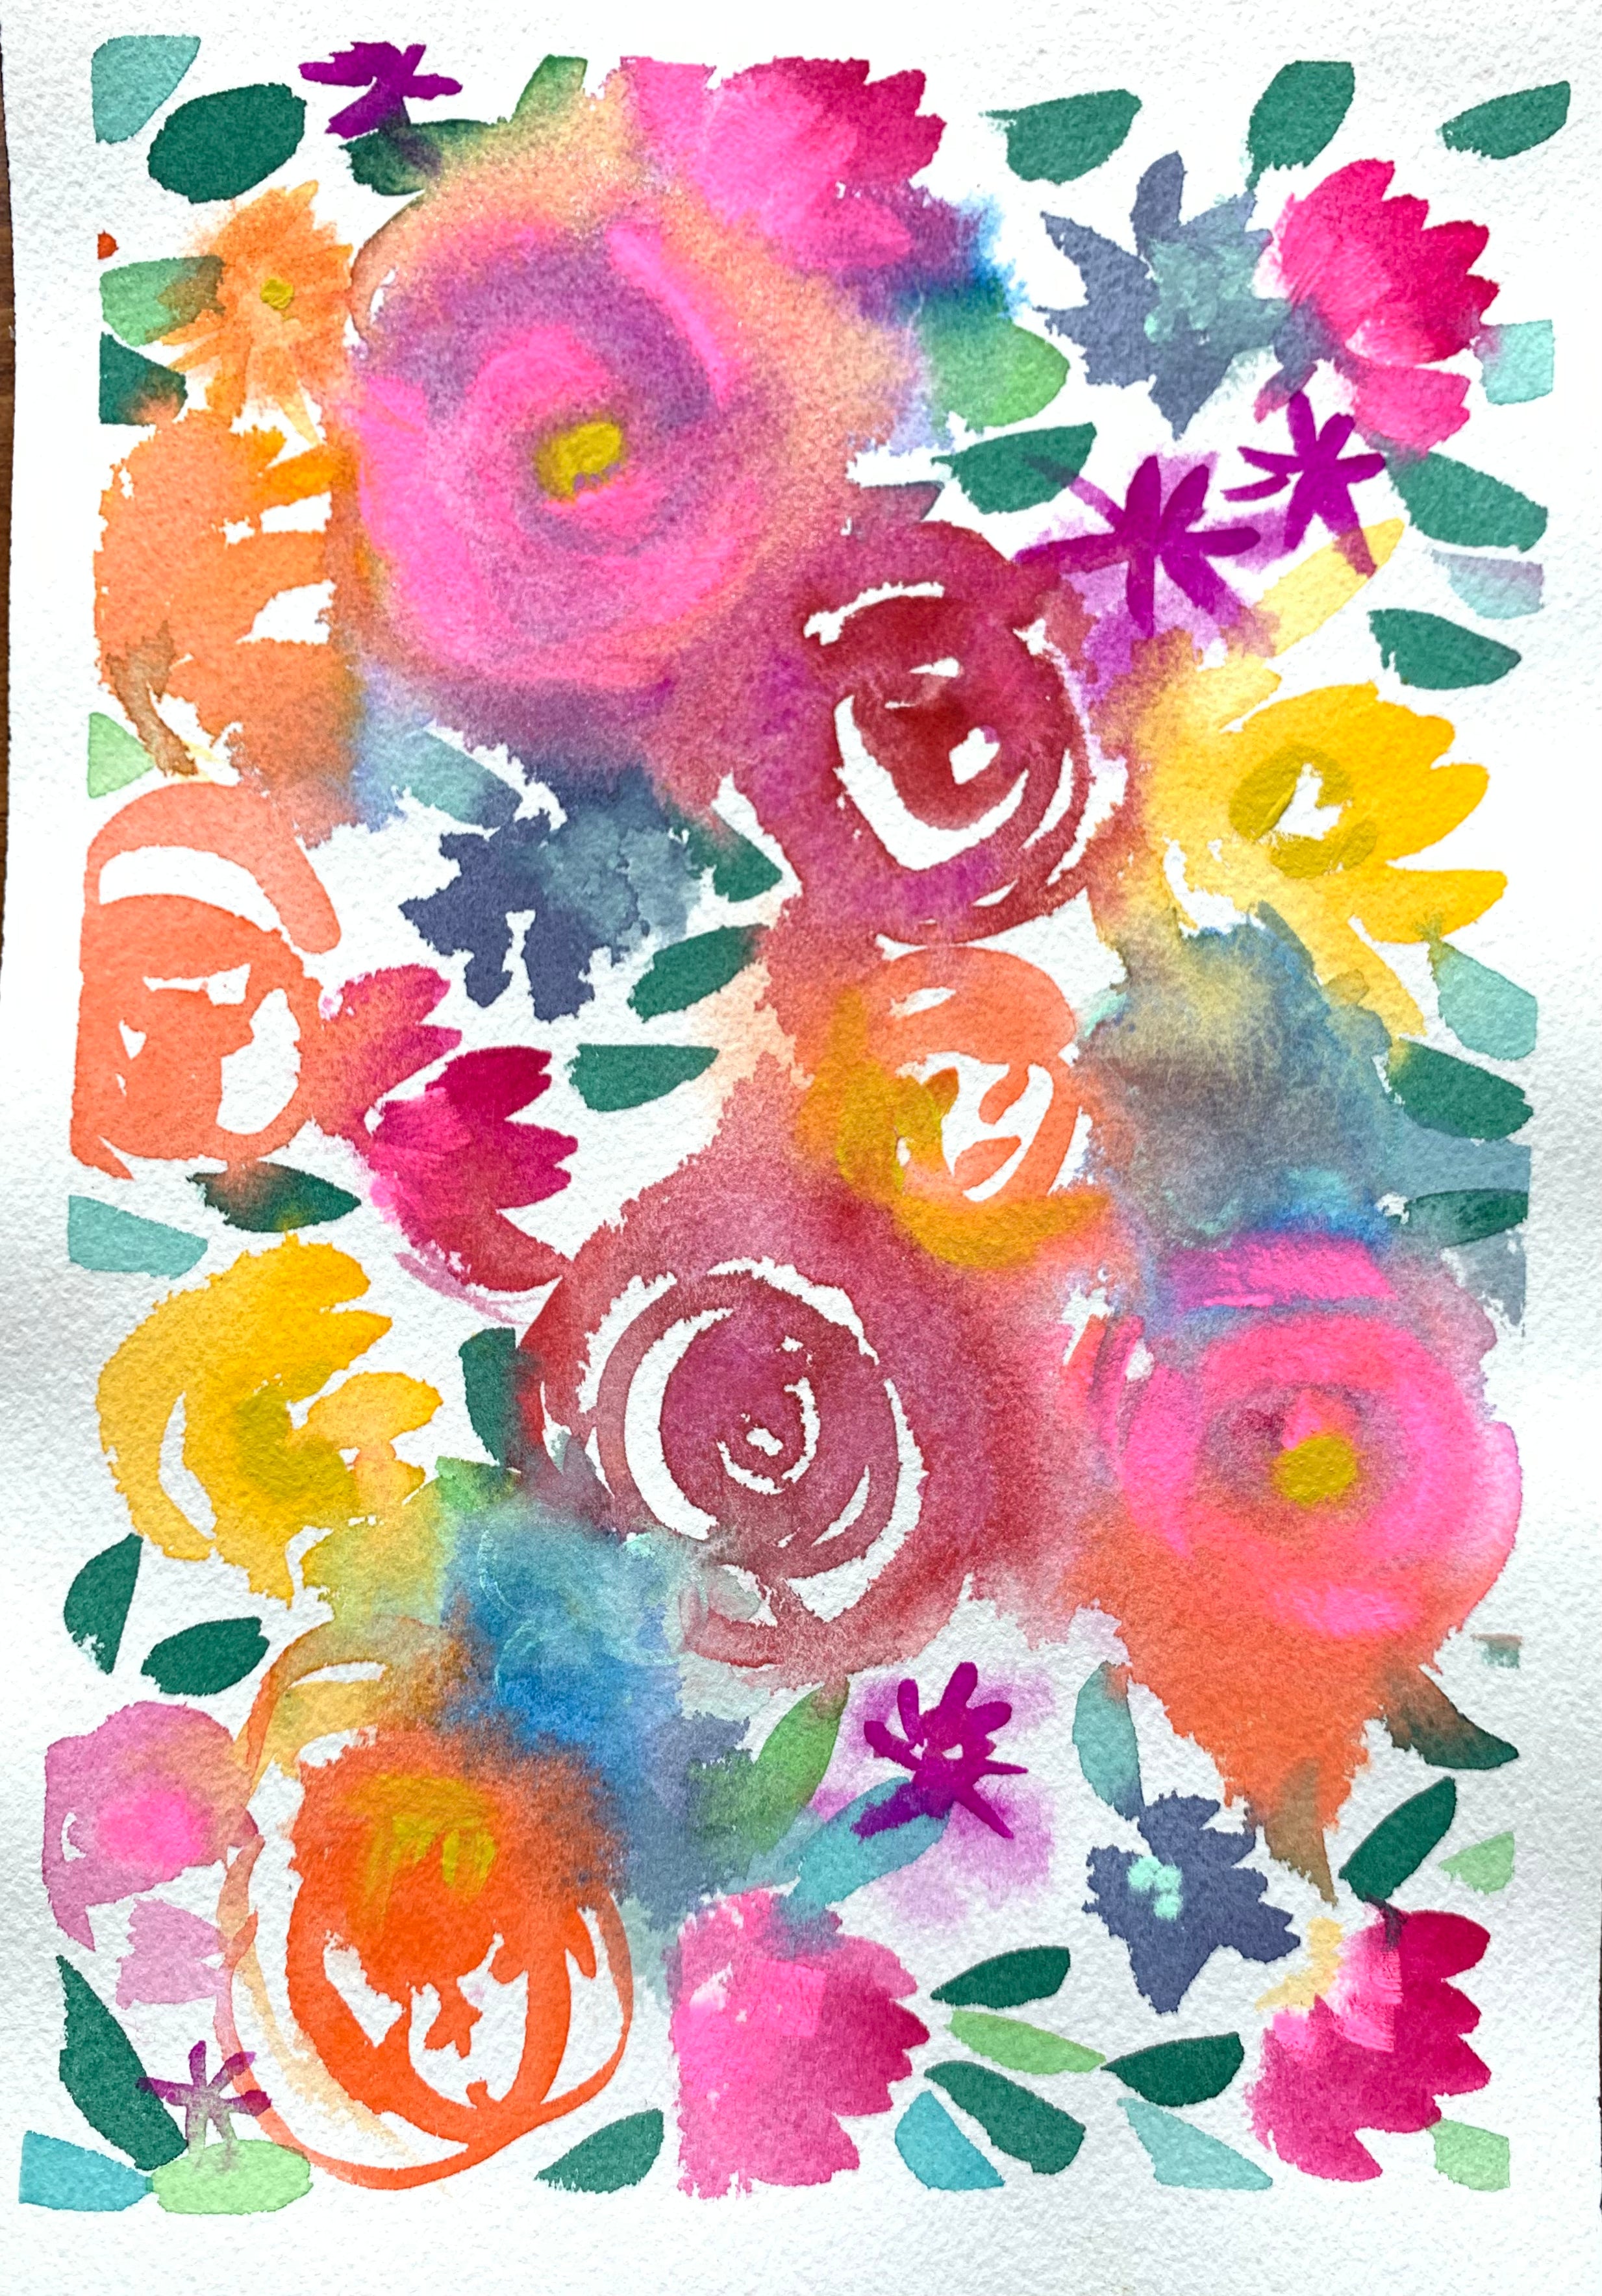 Hot Pink and Fuchsia Watercolor Painting